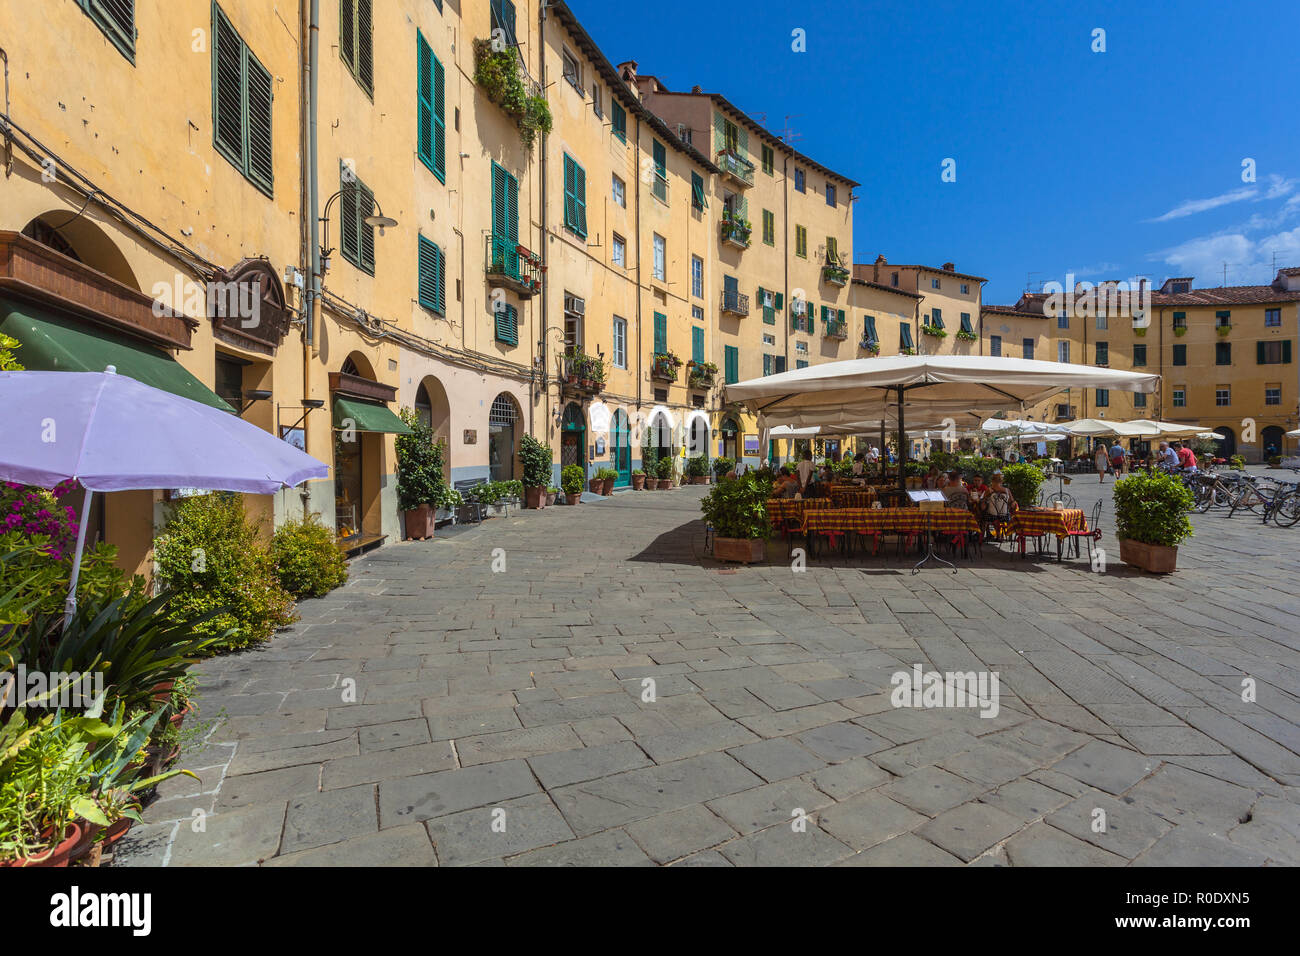 The Famous Oval City Square on a Sunny Day in Lucca, Tuscany, Italy Stock Photo